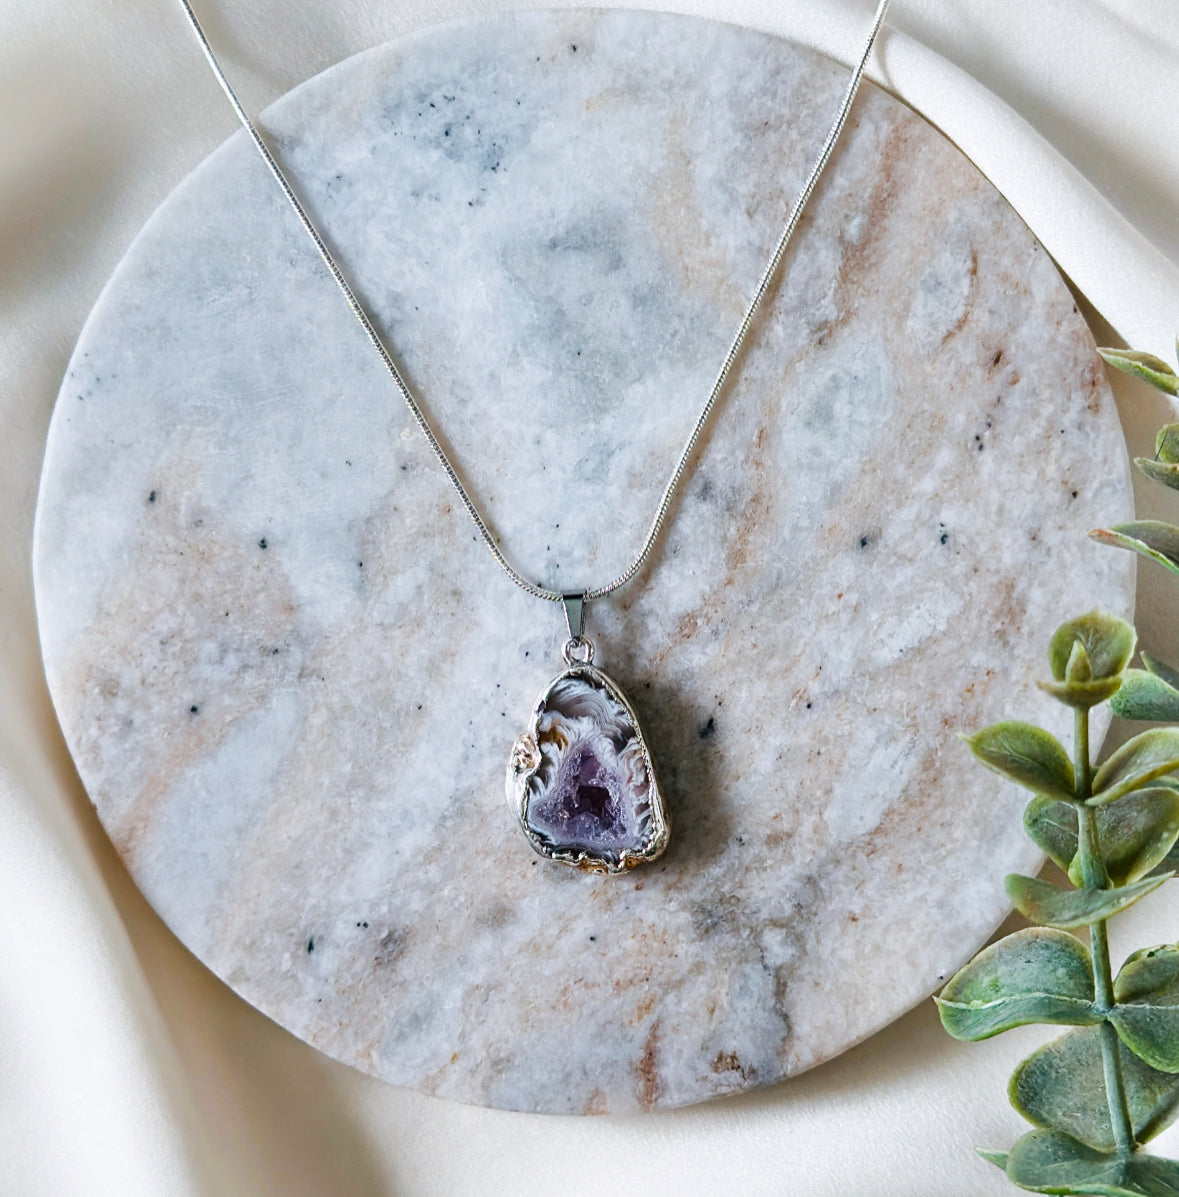 The Agate Geode Necklace